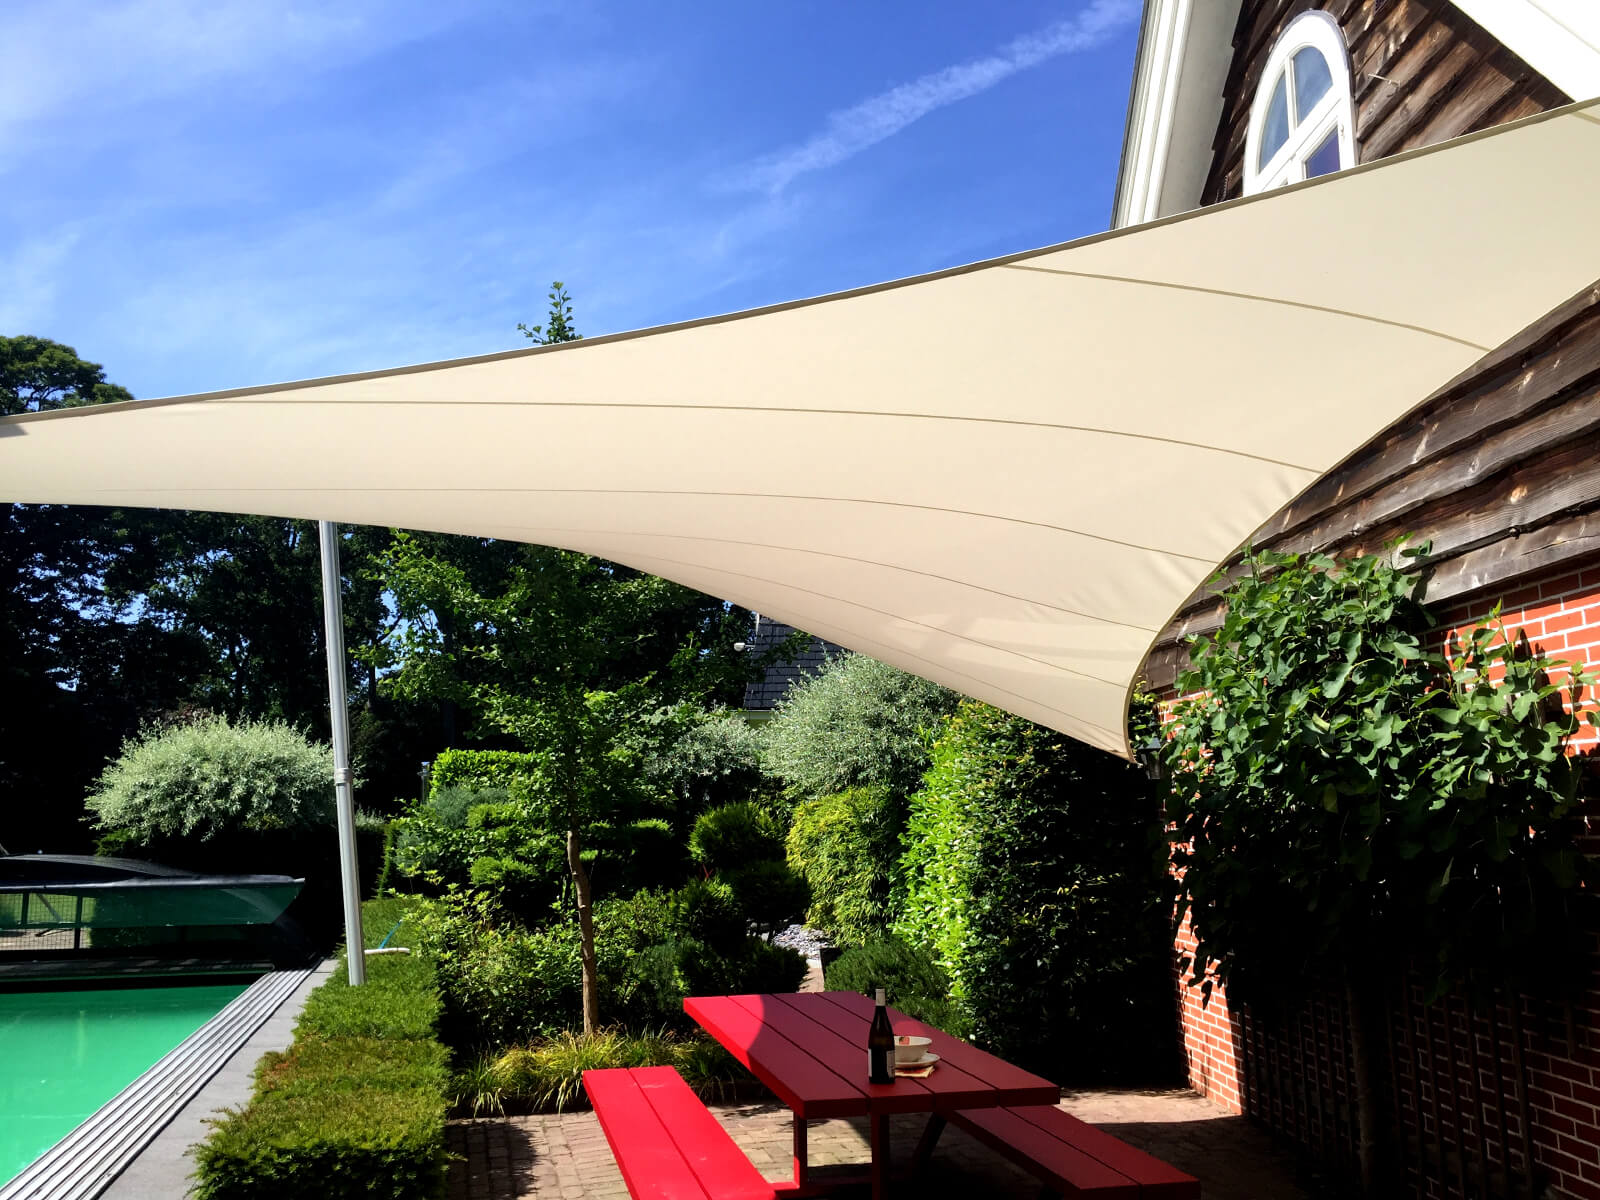 Our textile roof carport is Tailor based on your aesthetic and functional needs